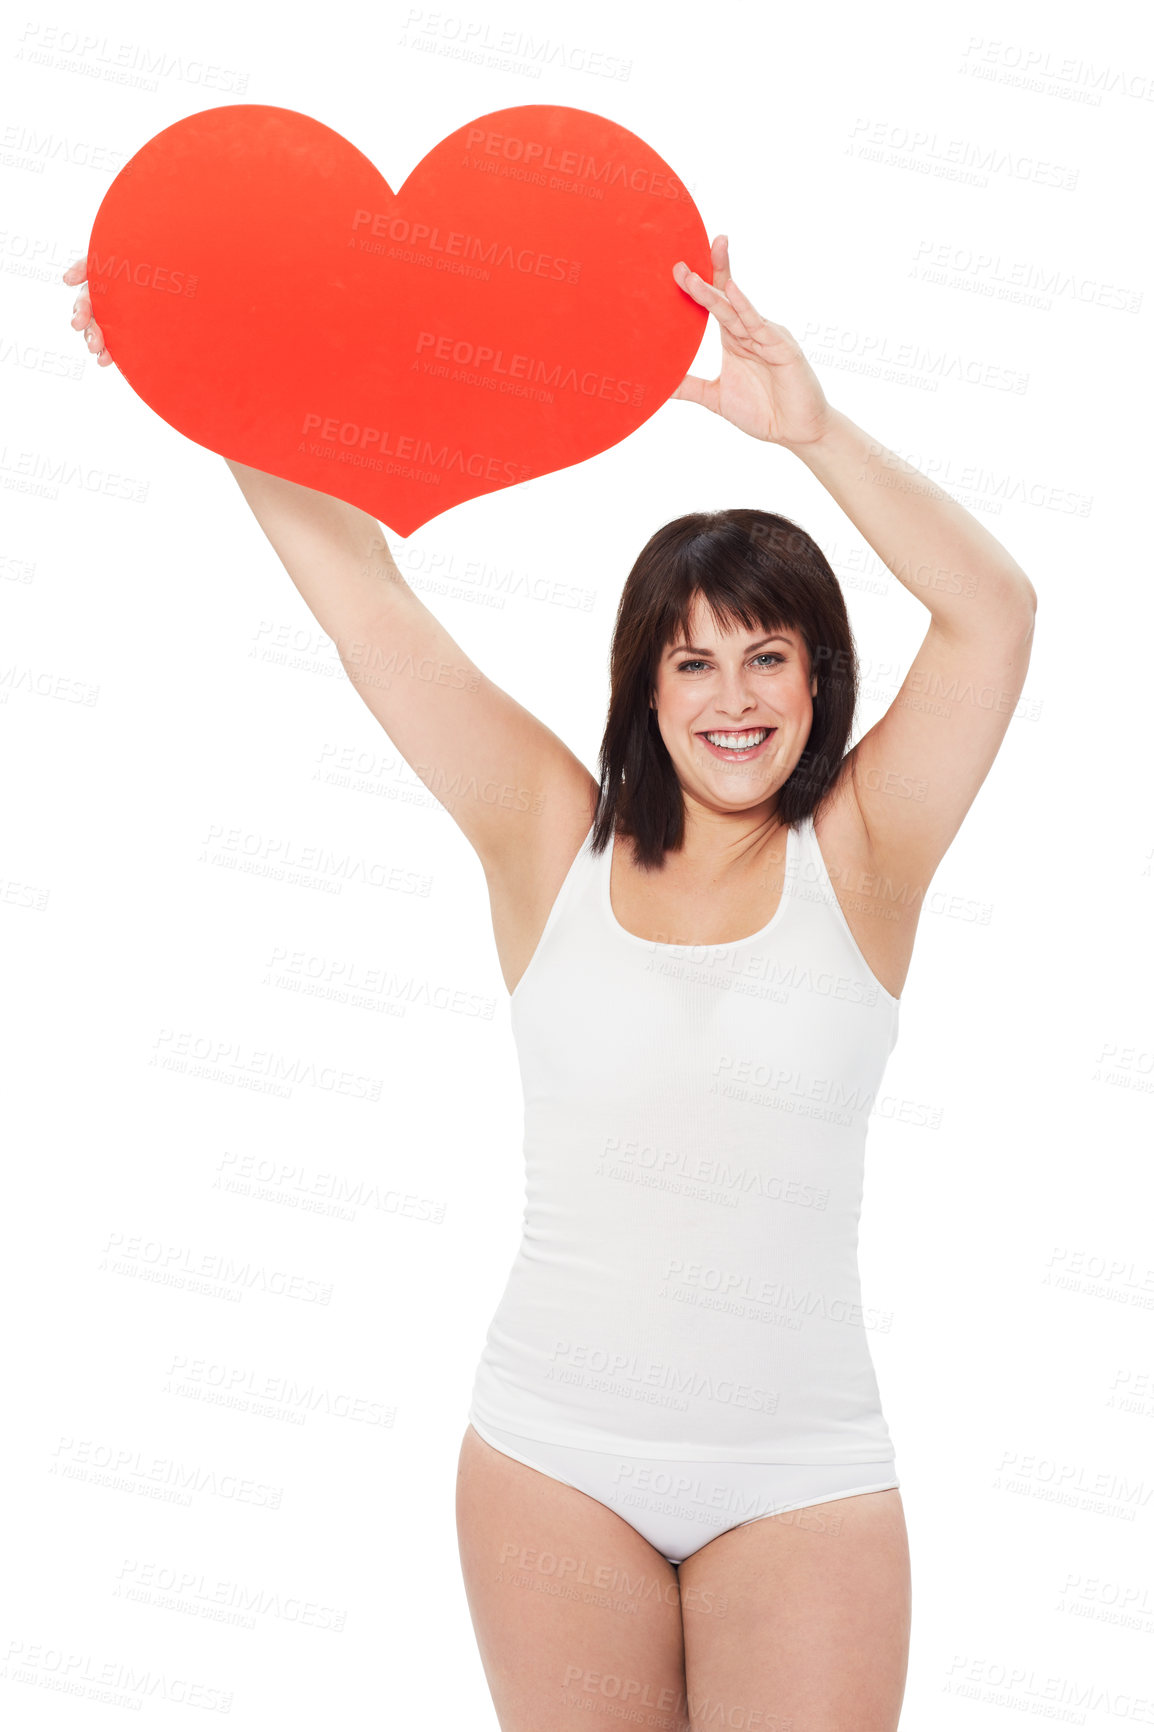 Buy stock photo Portrait, heart and happy plus size woman in studio isolated on a white background. Love, sign or symbol of model in underwear with healthy body for care, kindness emoji and romance on valentines day